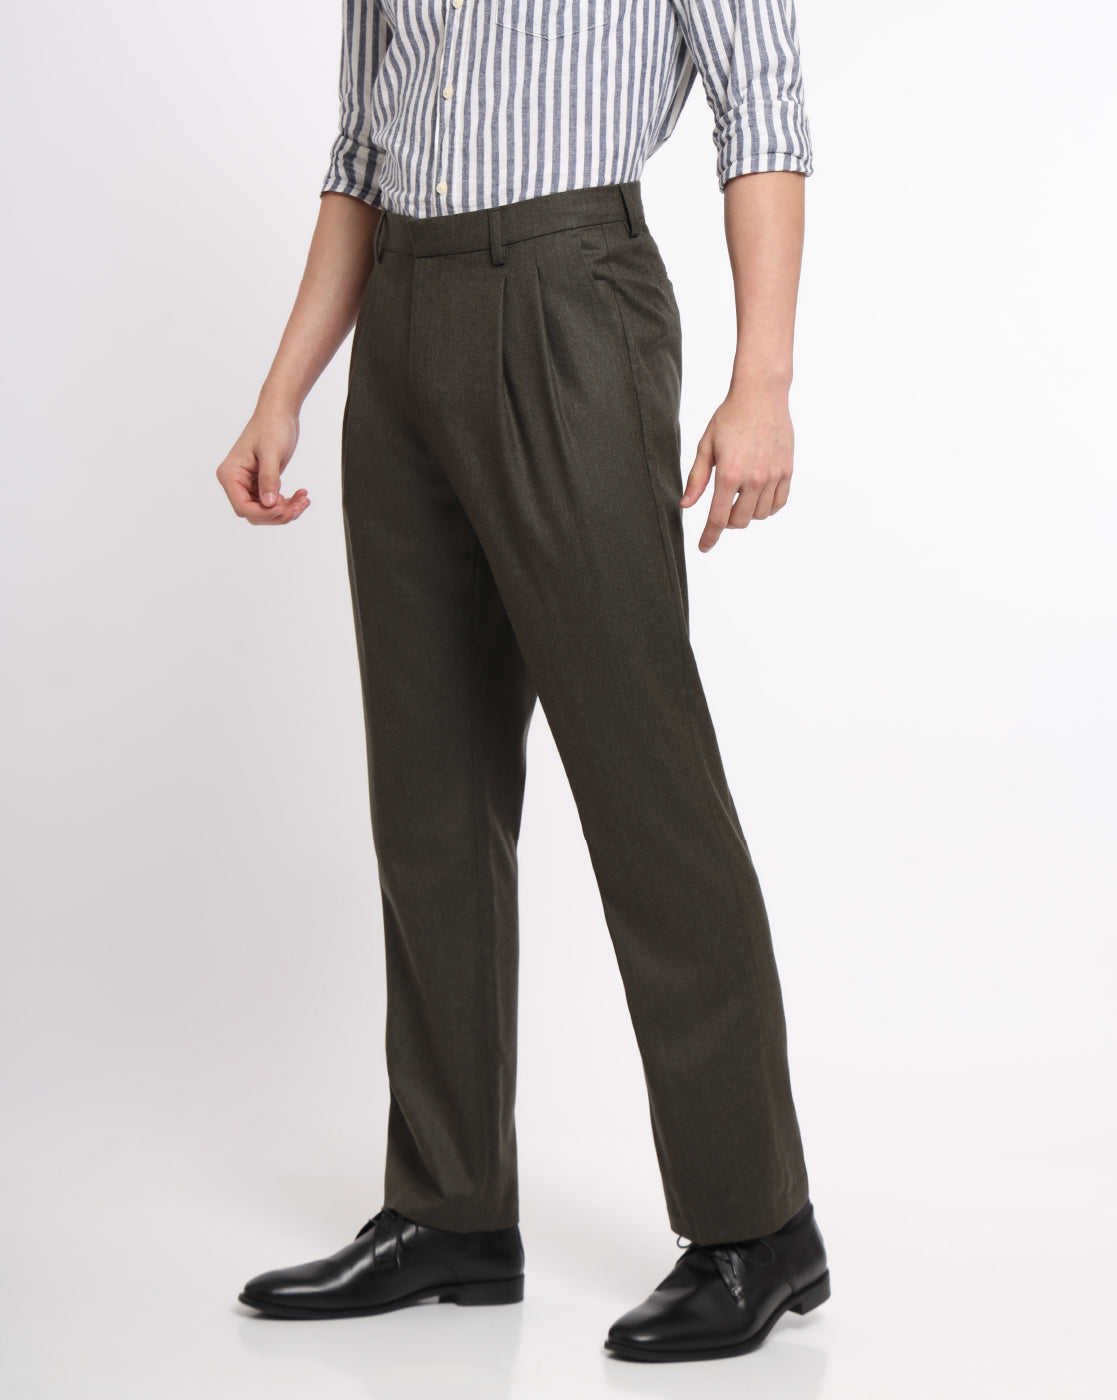 Double Pleated Wool Pants - Olive